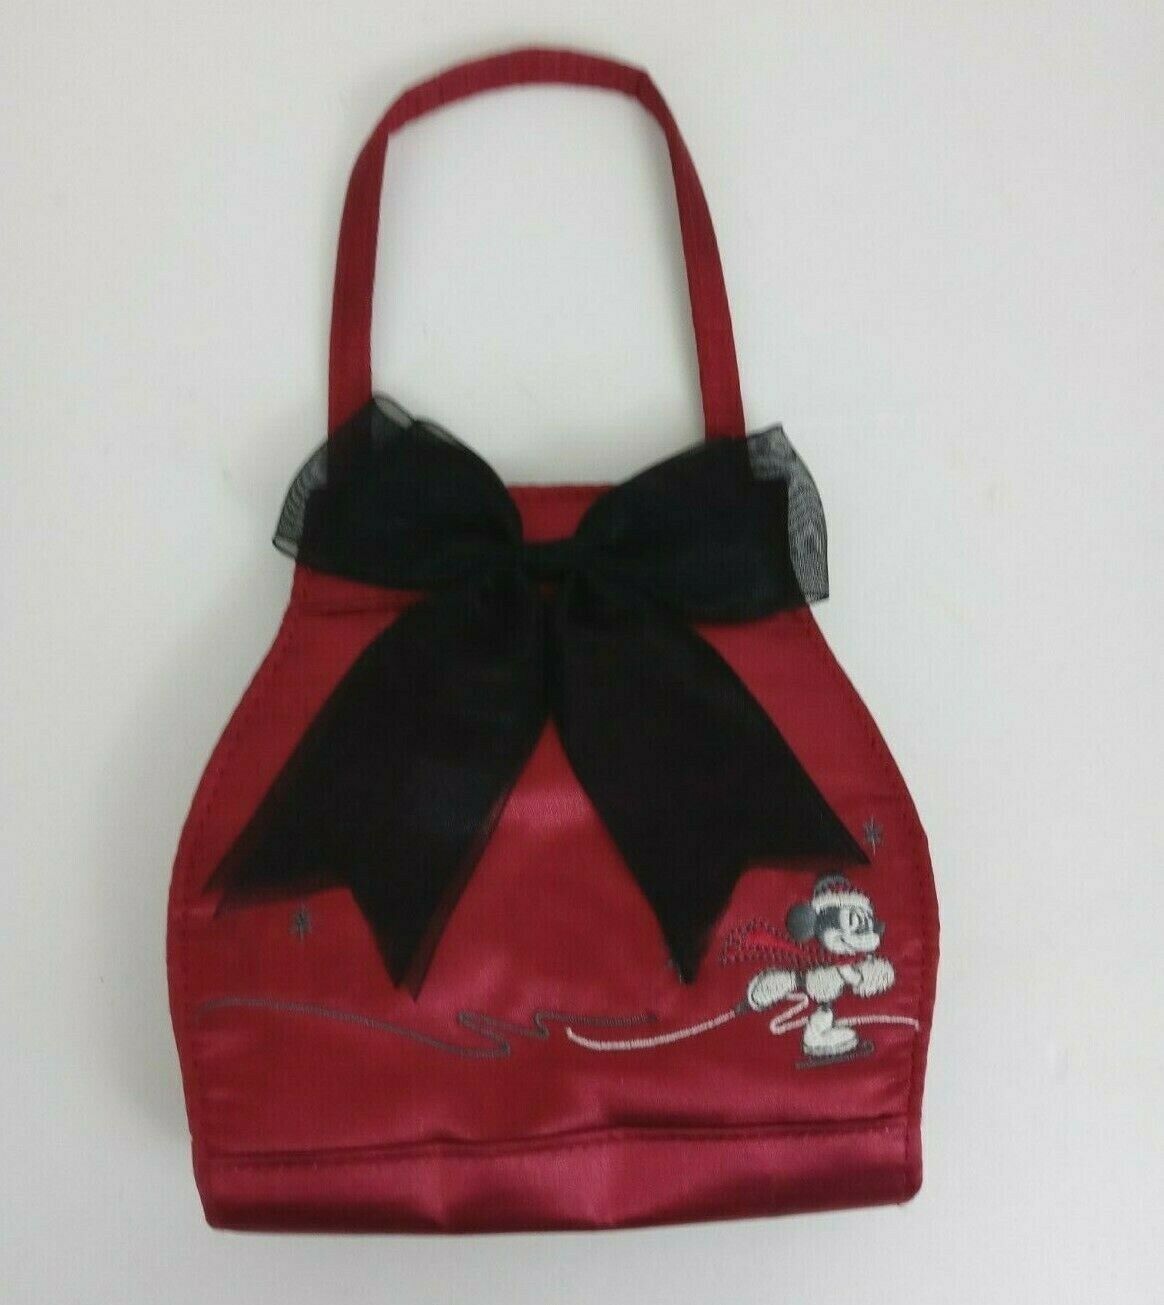 The Disney Store Little Girls Red Handbag Purse Minnie Mouse Ice Skating W/ Bow - $12.60